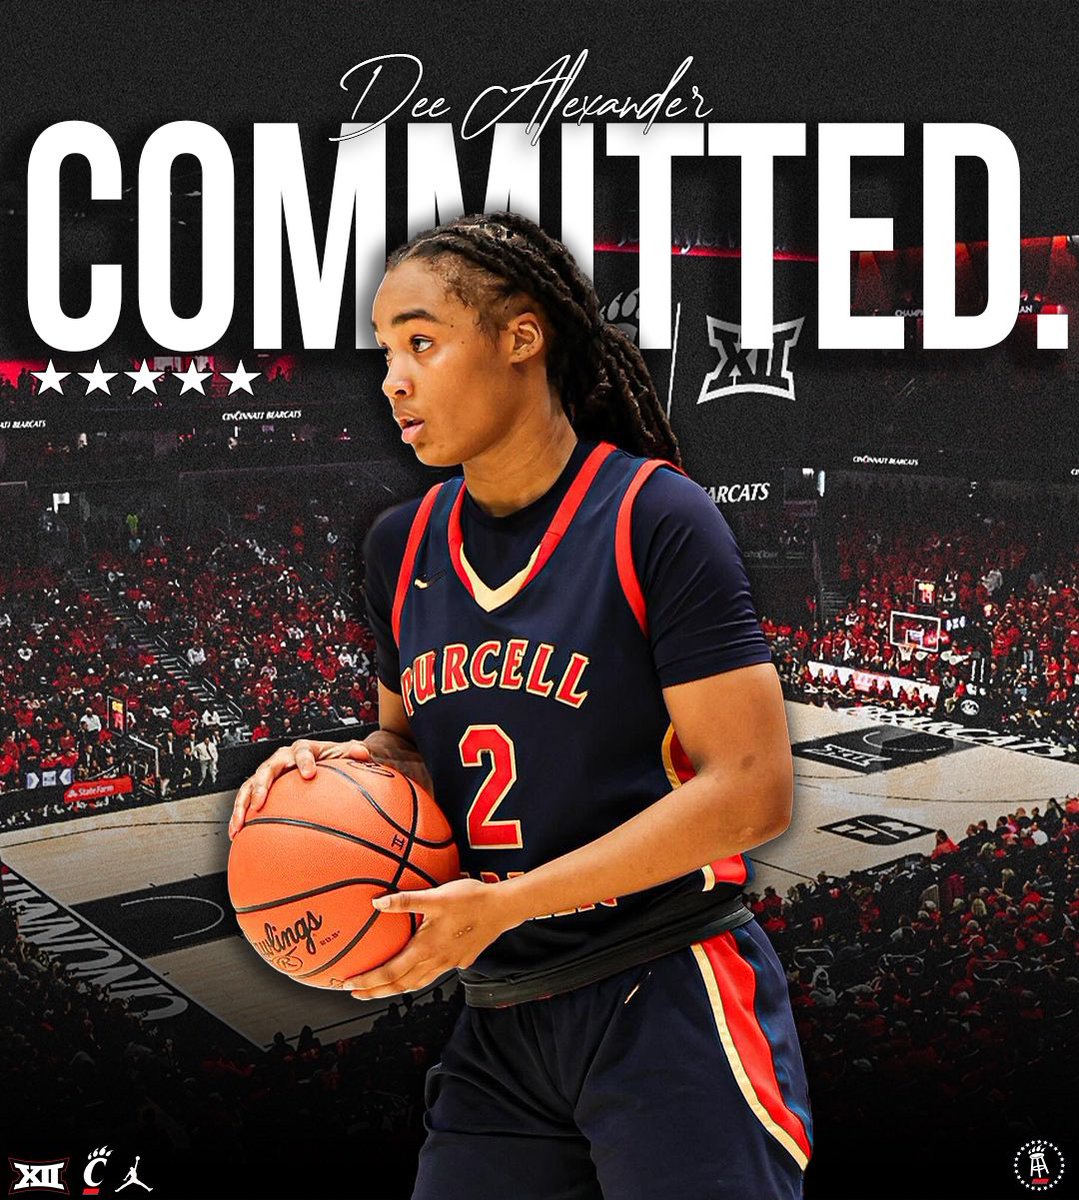 BREAKING: 5 Star Women’s Basketball recruit and Dee Alexander has committed to Cincinnati ‼️ Dee is #6 overall in the class of 2025 HUGE FOR THE PROGRAM